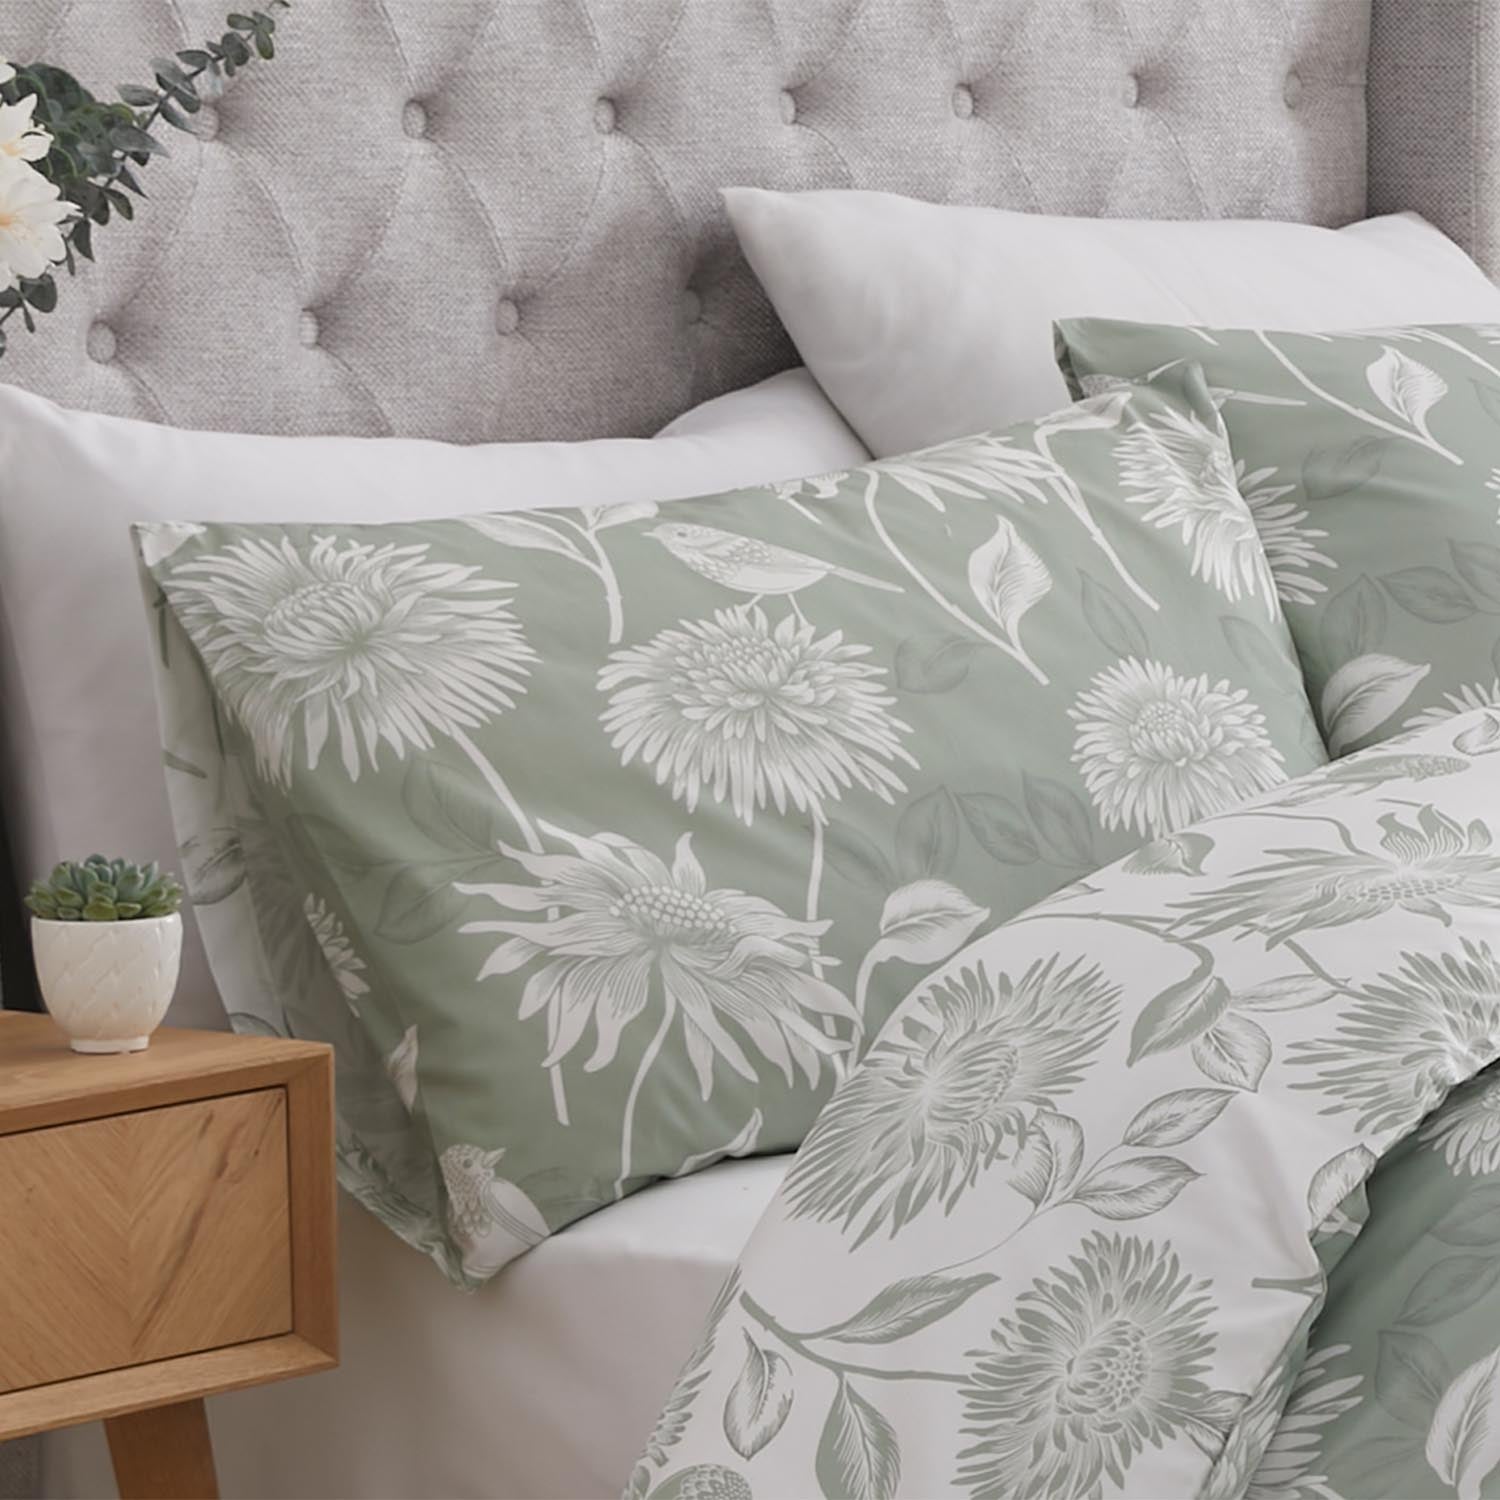  The Home Collection Veronique Teal Duvet Cover Set 4 Shaws Department Stores